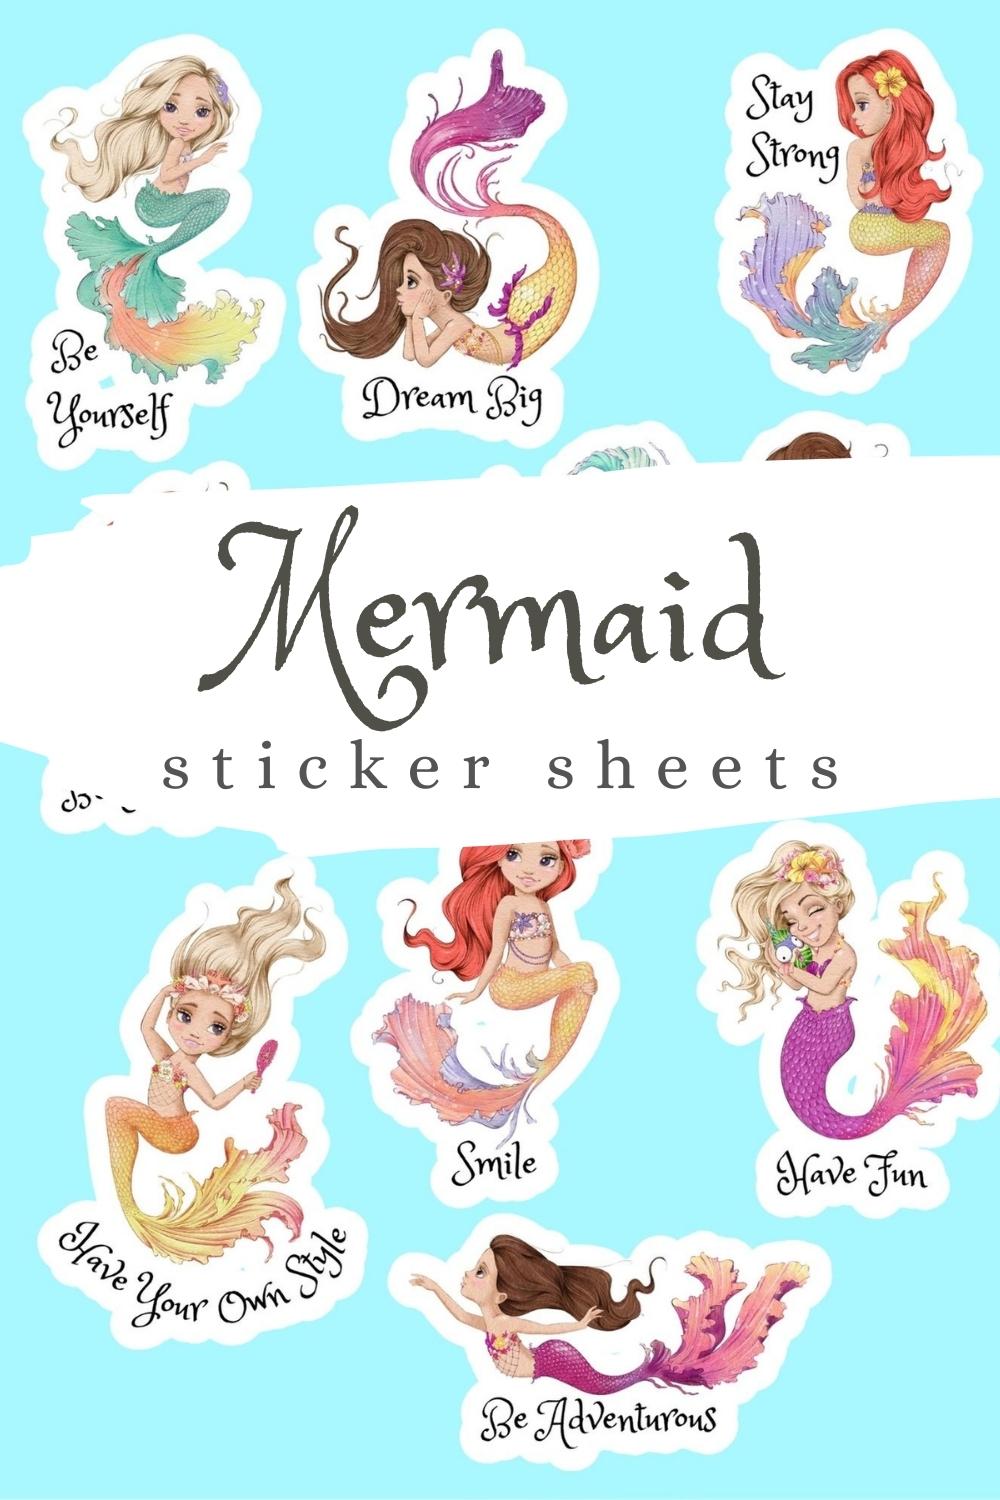 A mermaid sticker sheet designed with cute messages of encouragement.